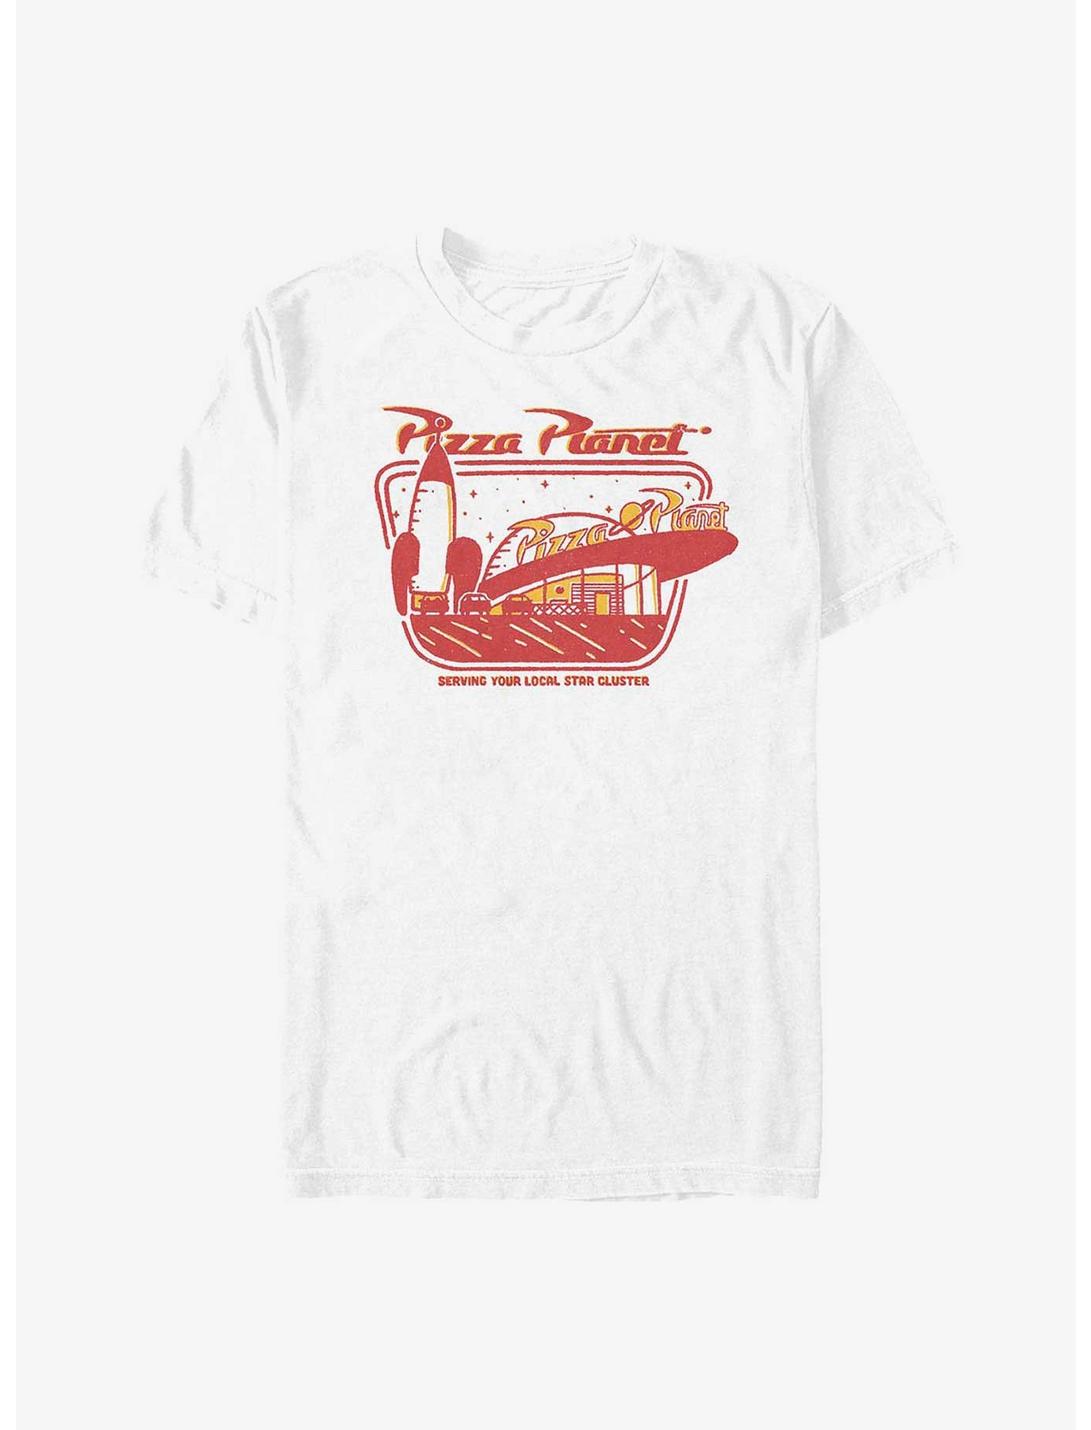 Disney Pixar Toy Story Pizza Planet Serving Your Local Star Cluster T-Shirt, WHITE, hi-res